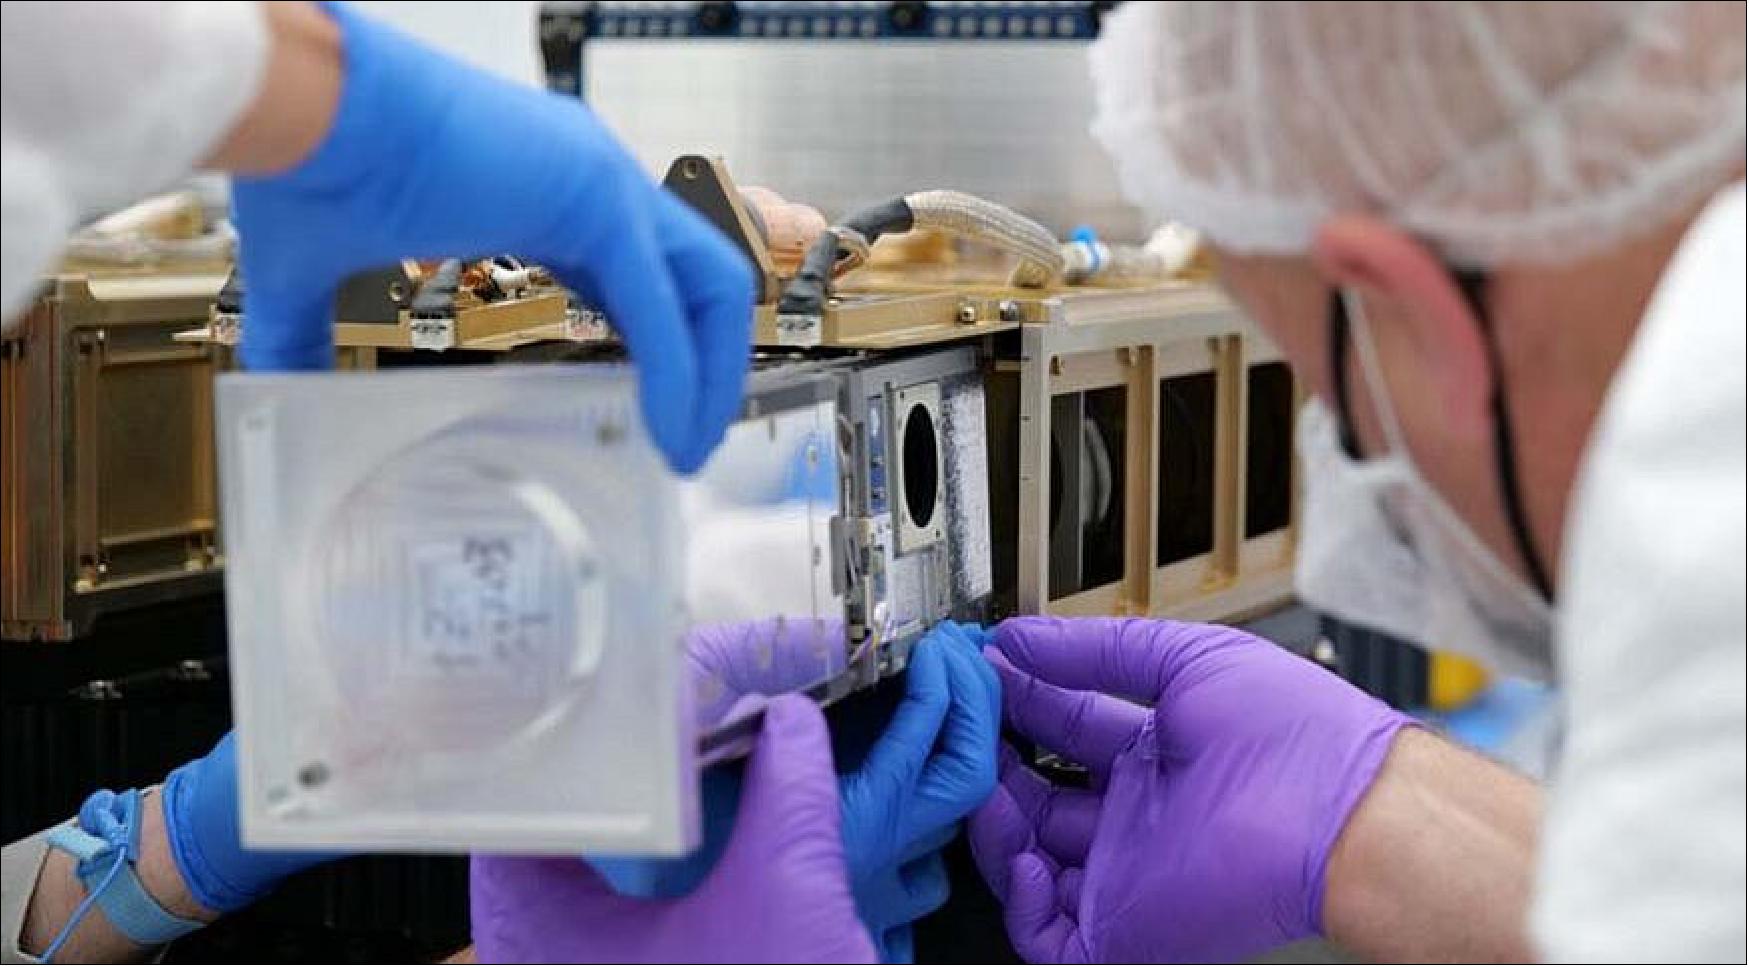 Figure 8: Missile Defense Agency (MDA) and VOX Space engineers integrate the CubeSat networked communications experiment at the company’s integration facility in Long Beach, Calif., in preparation for launch June 30, 2021 (image credit: VOX Space)